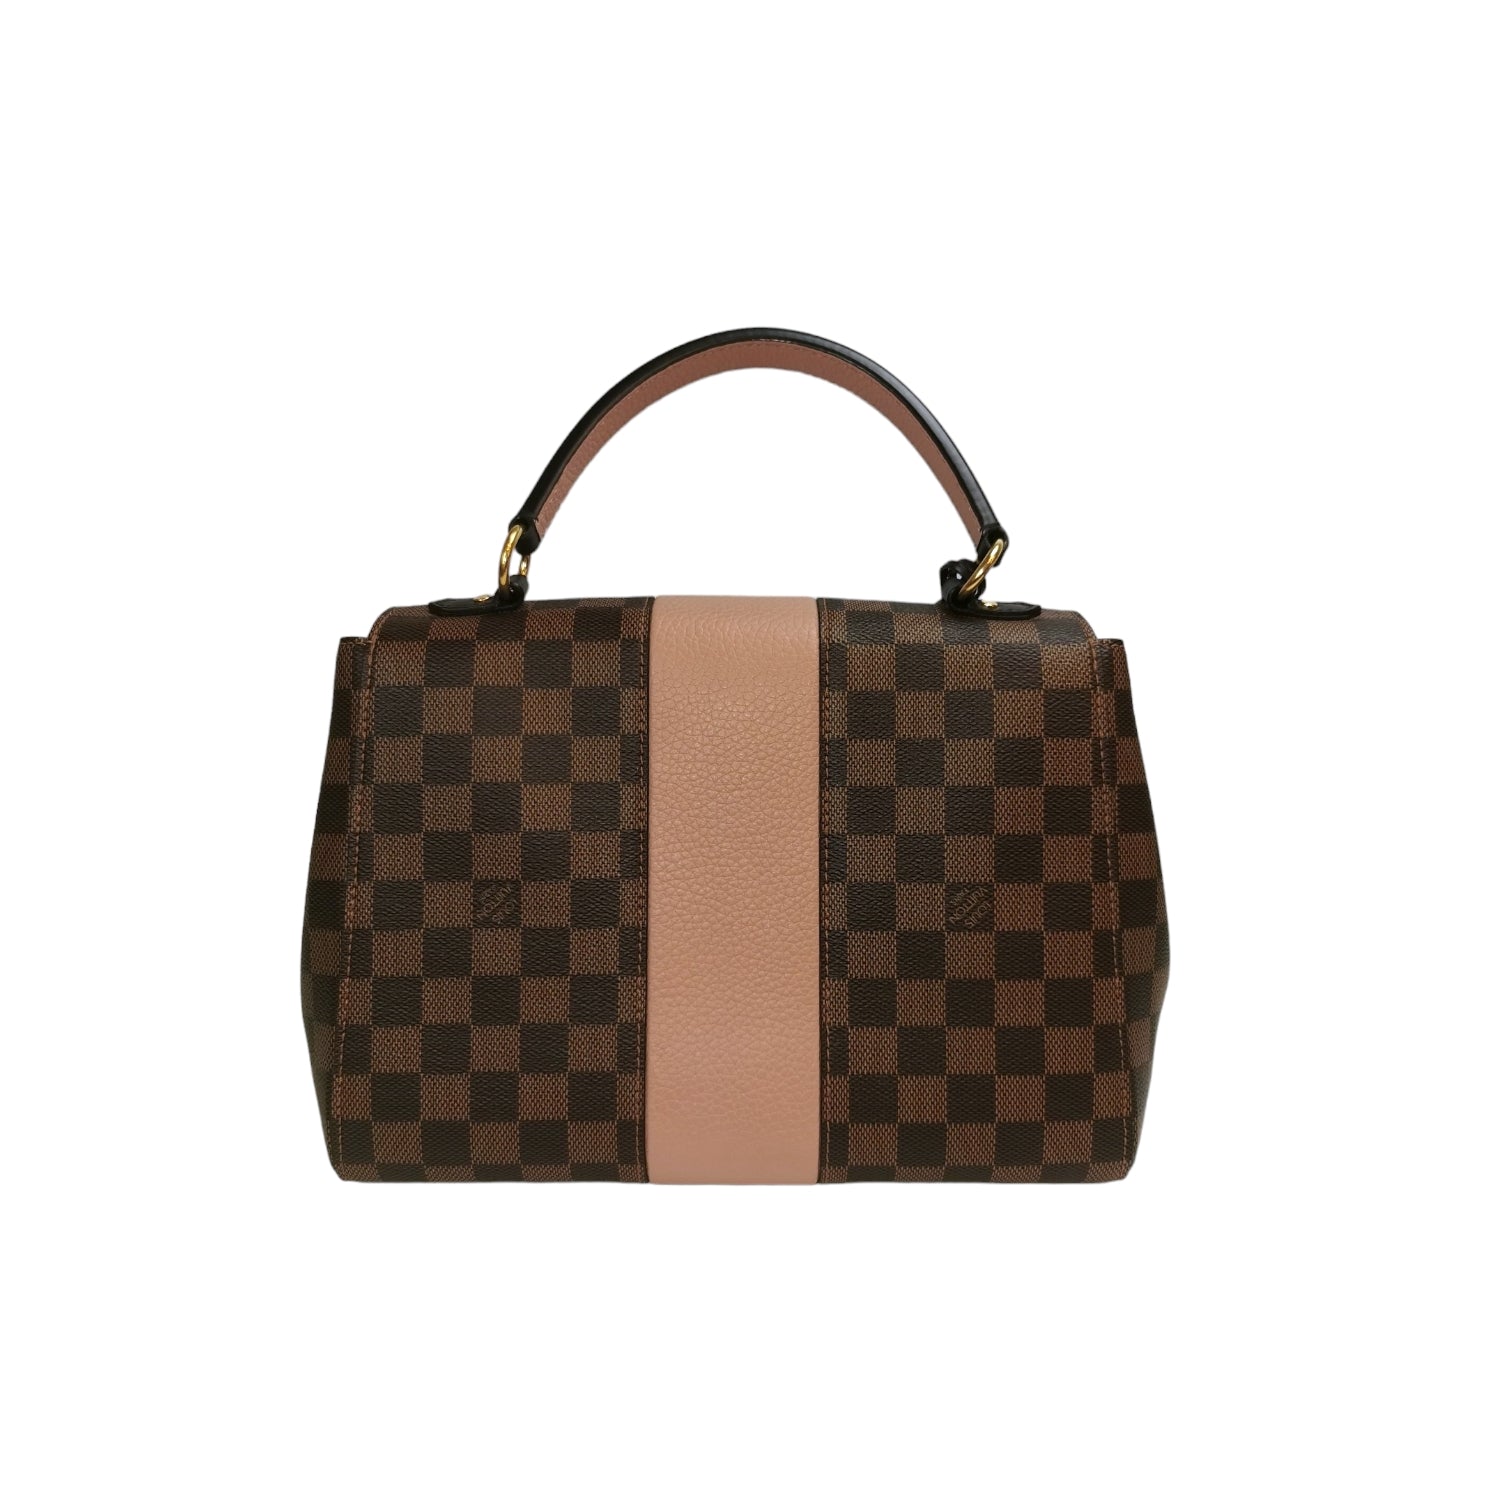 Louis Vuitton Bond Street BB (used once)